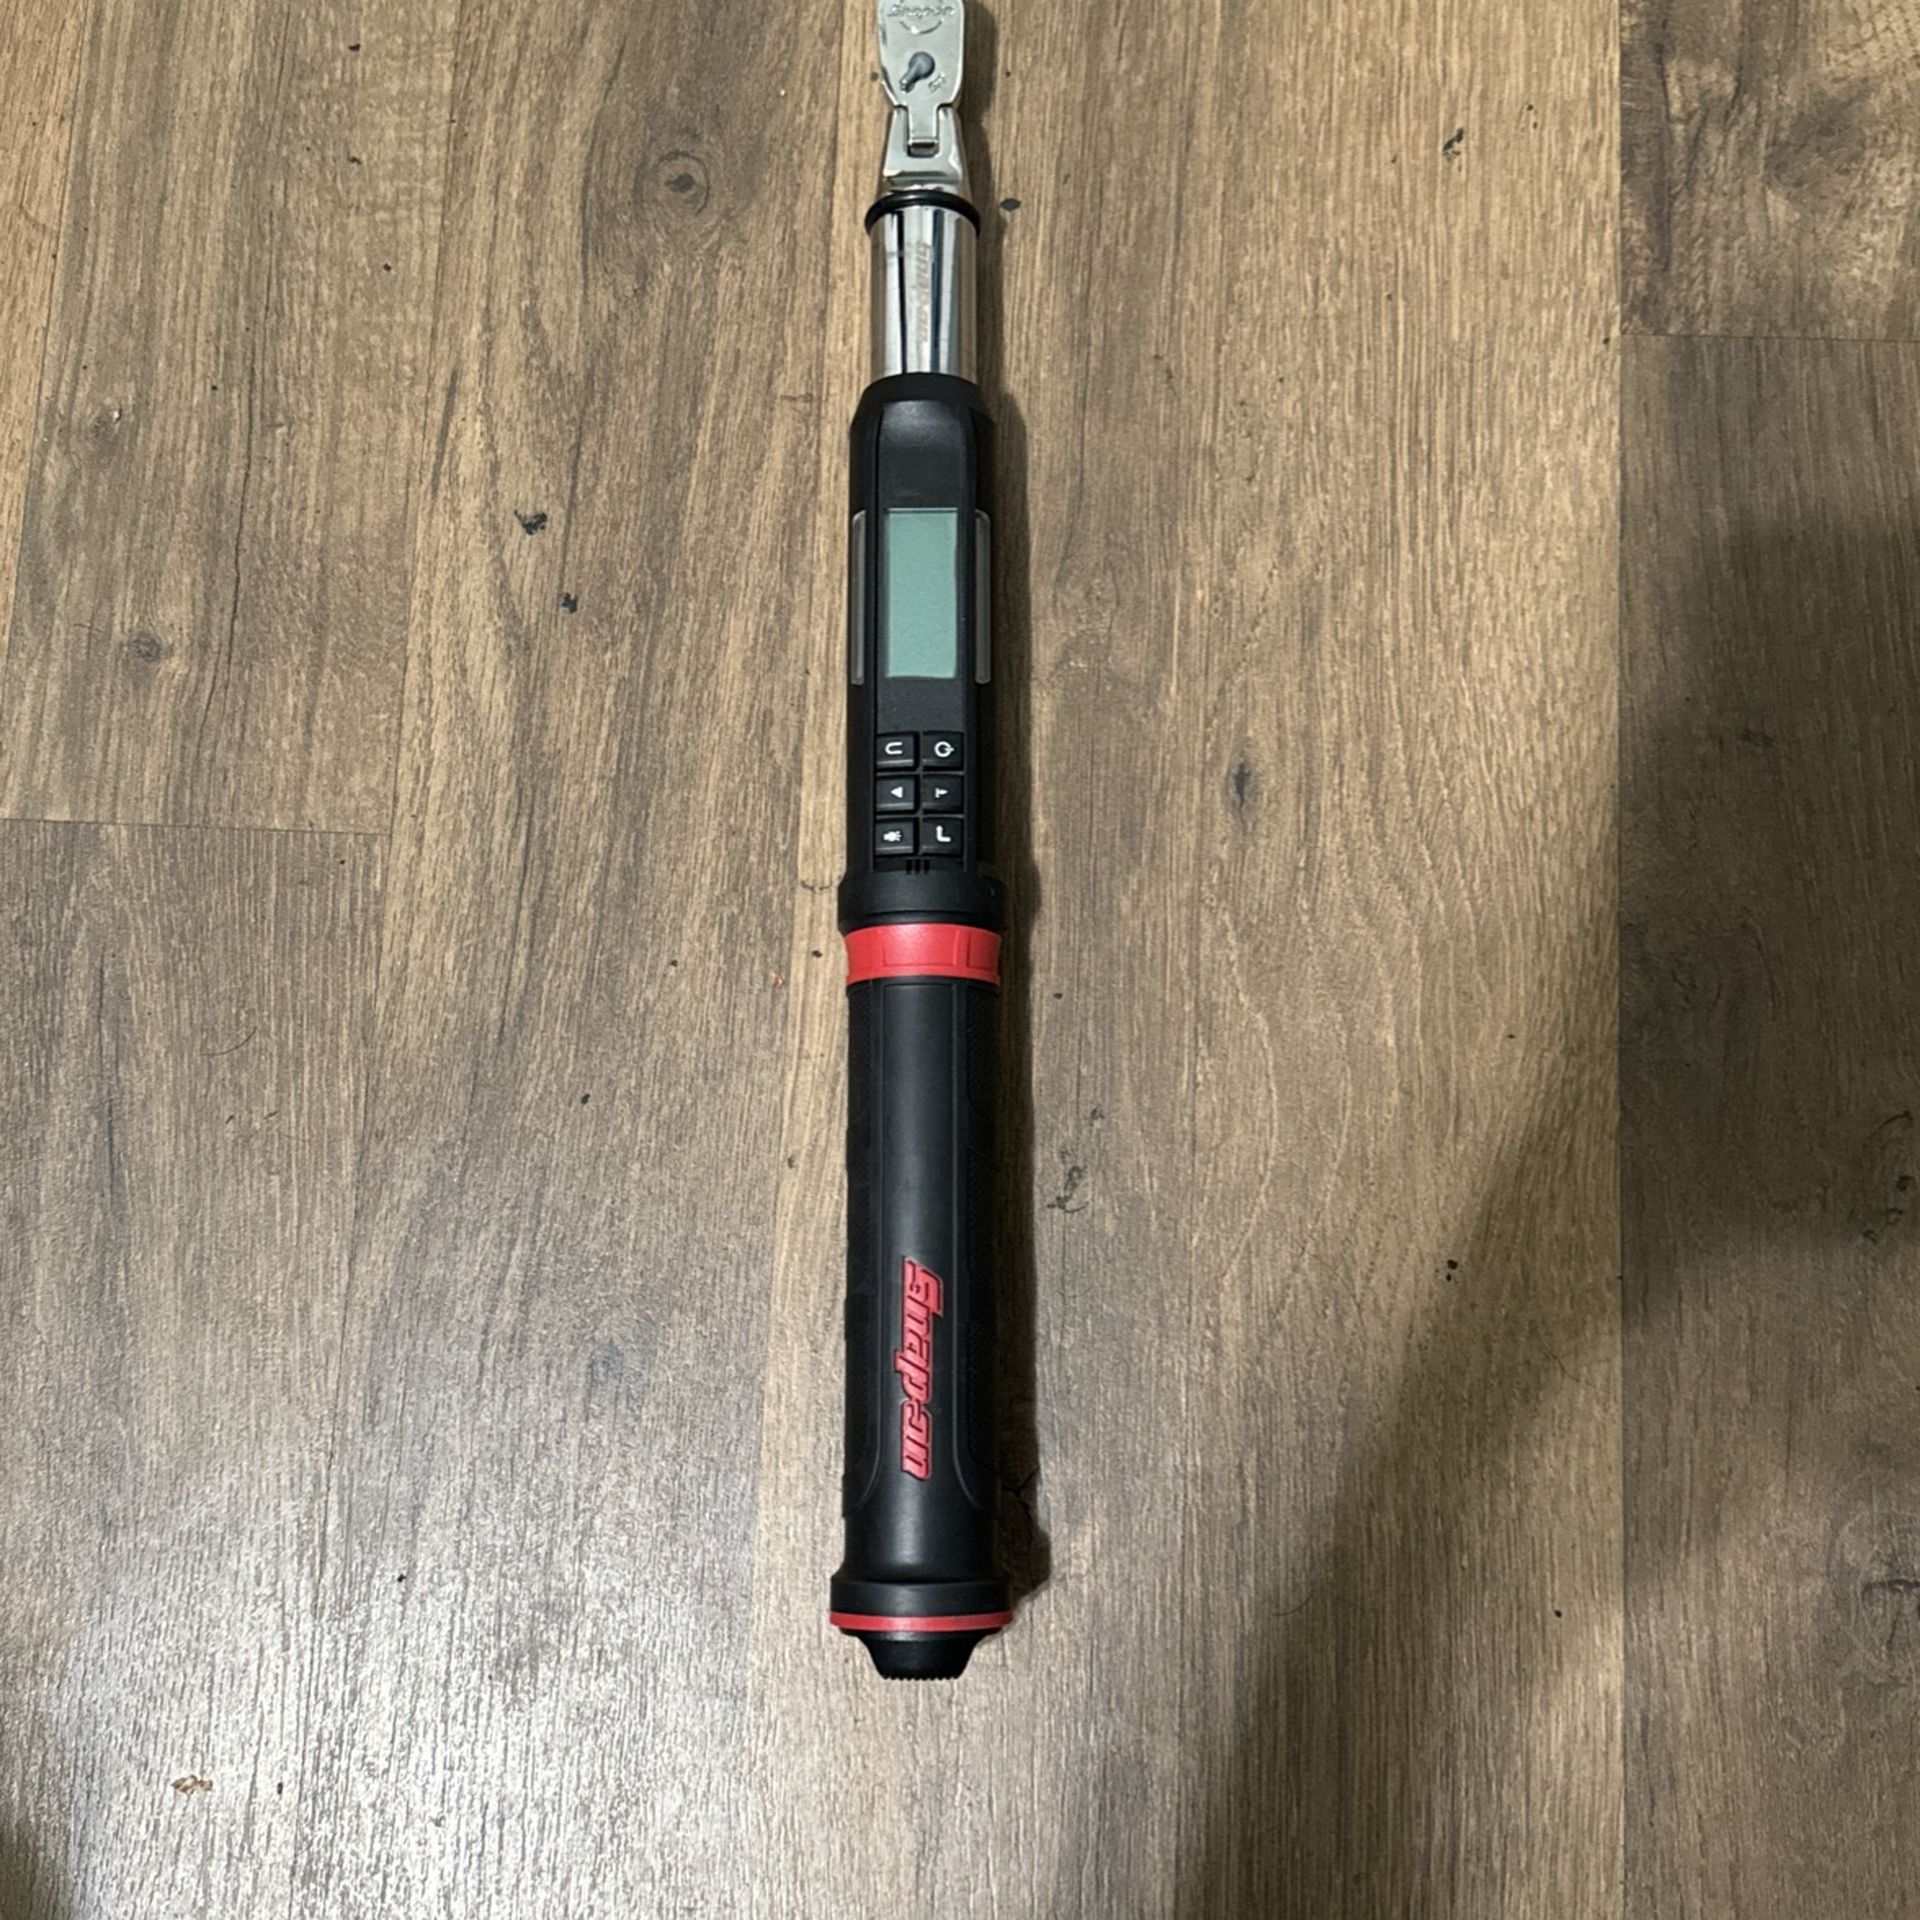 Snapon torque wrench 